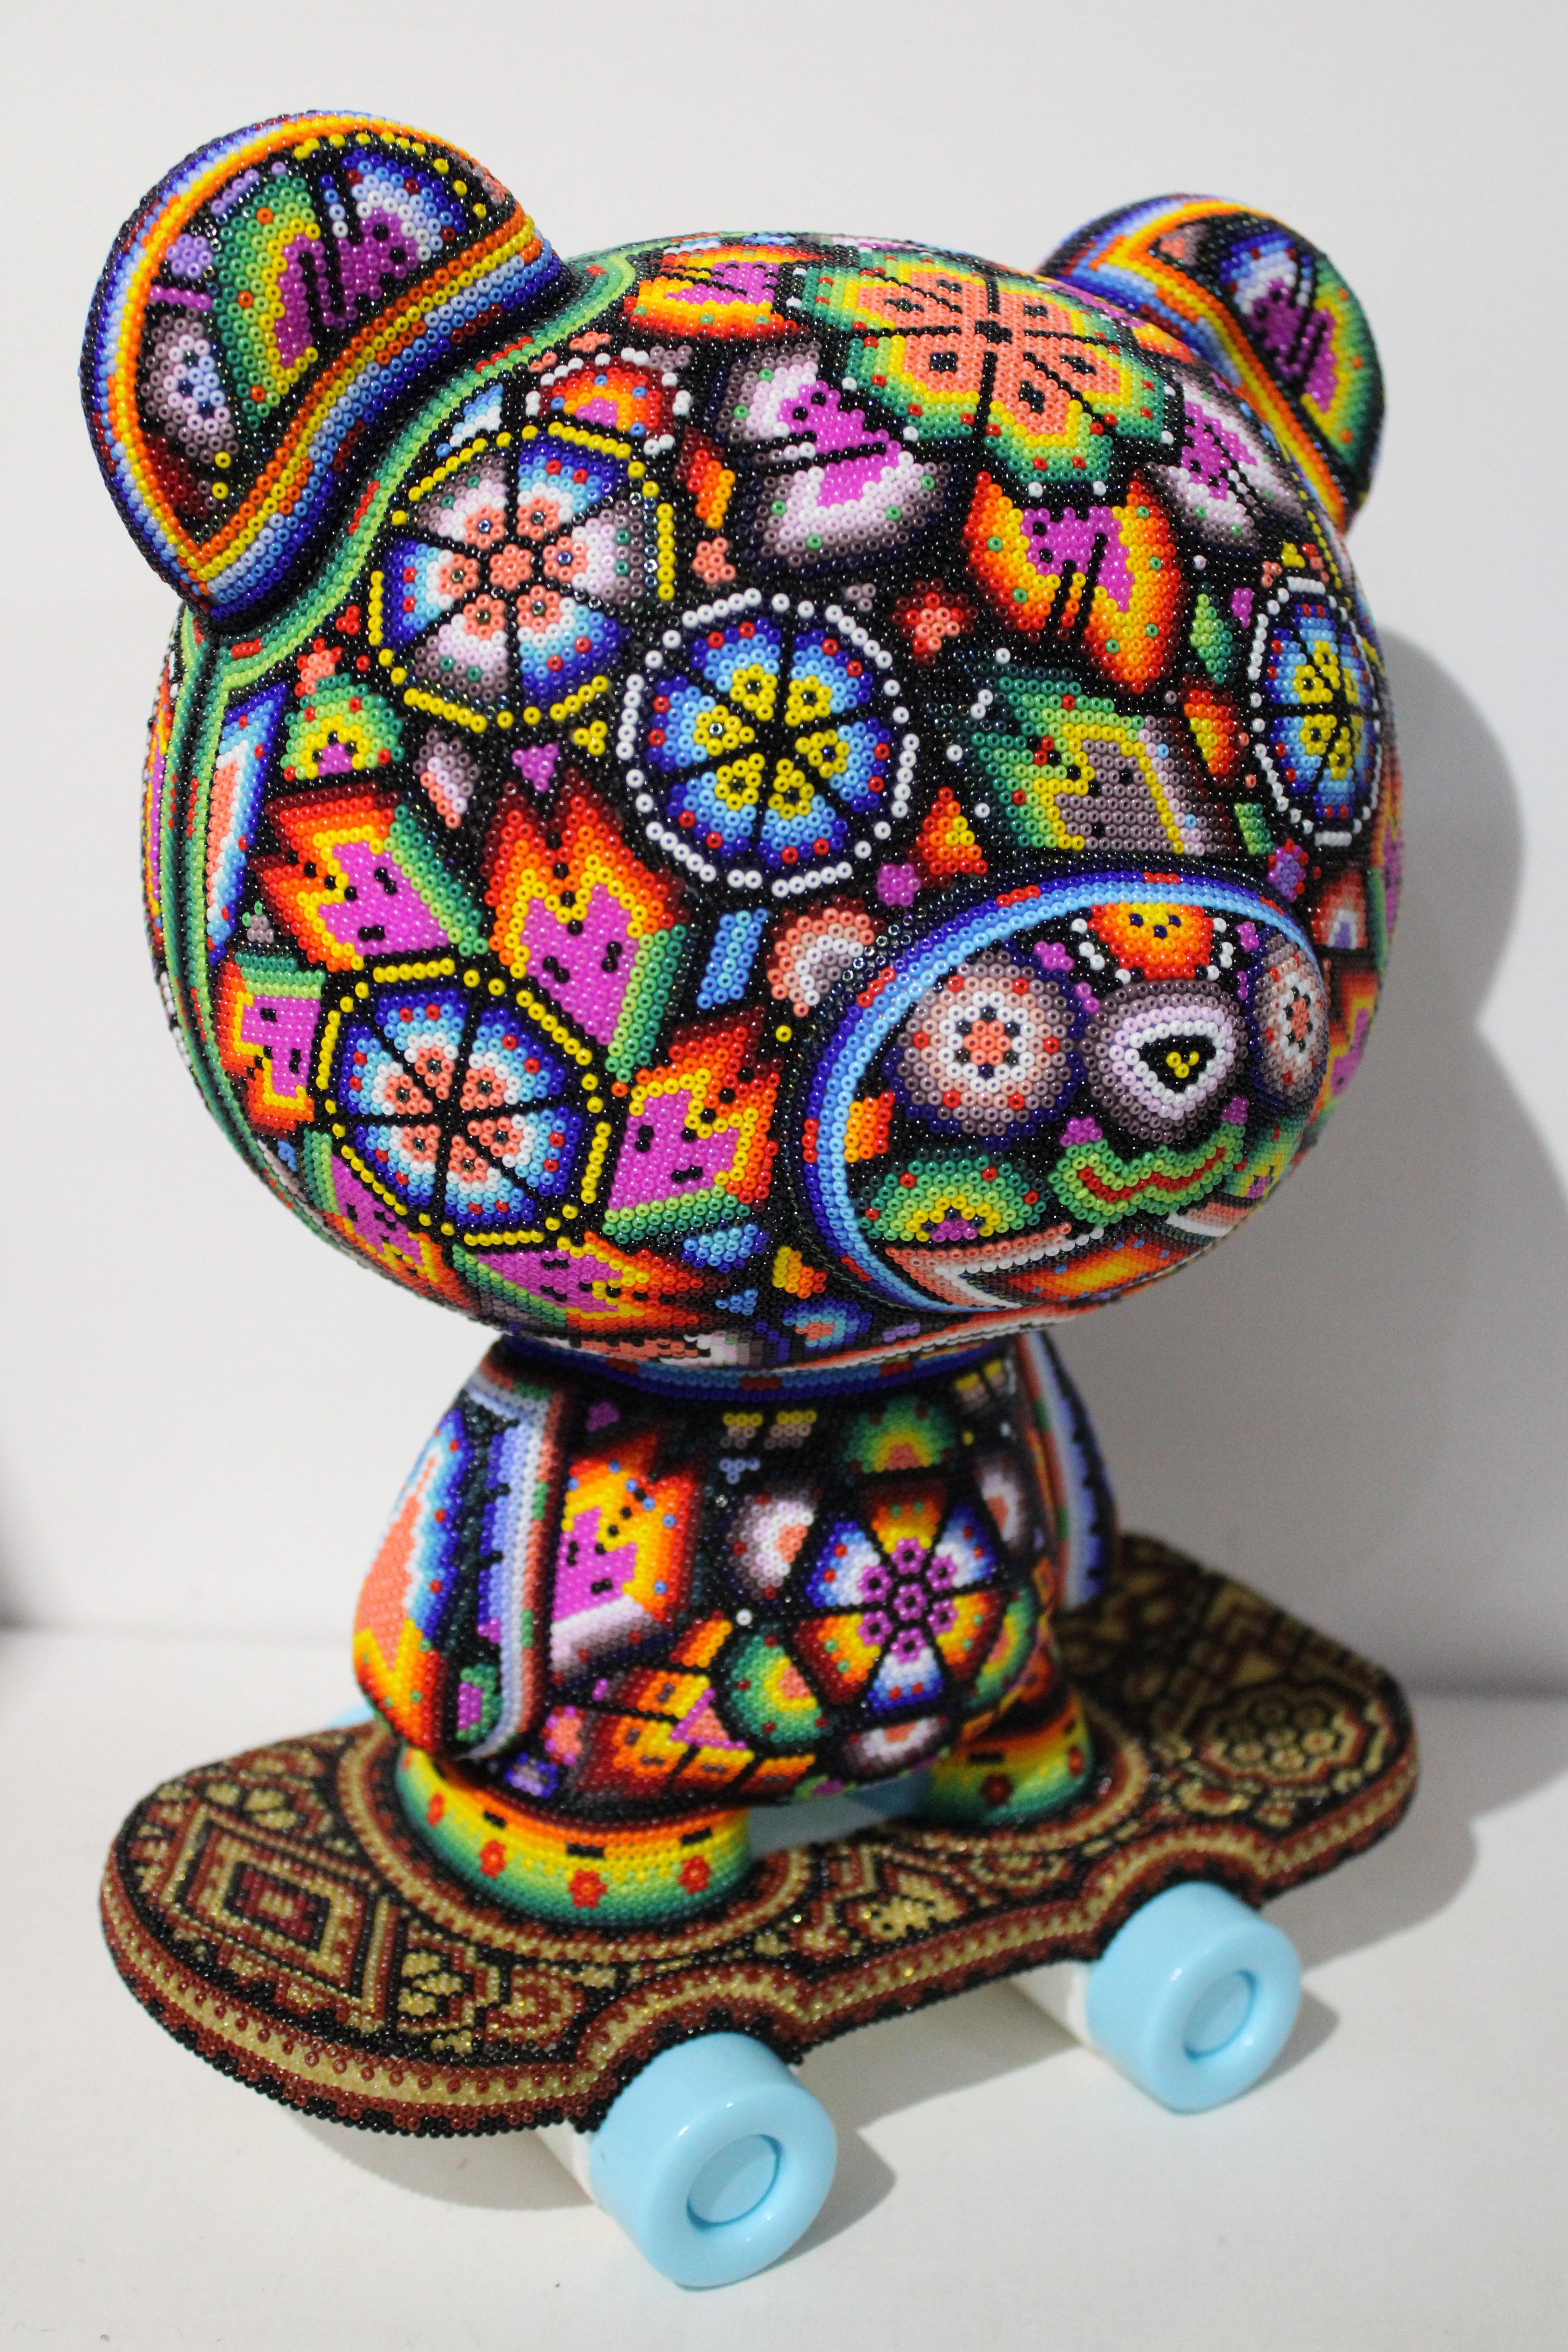 CHROMA aka Rick Wolfryd  Figurative Sculpture - "Care Bear"  from Huichol ALTERATIONS Series